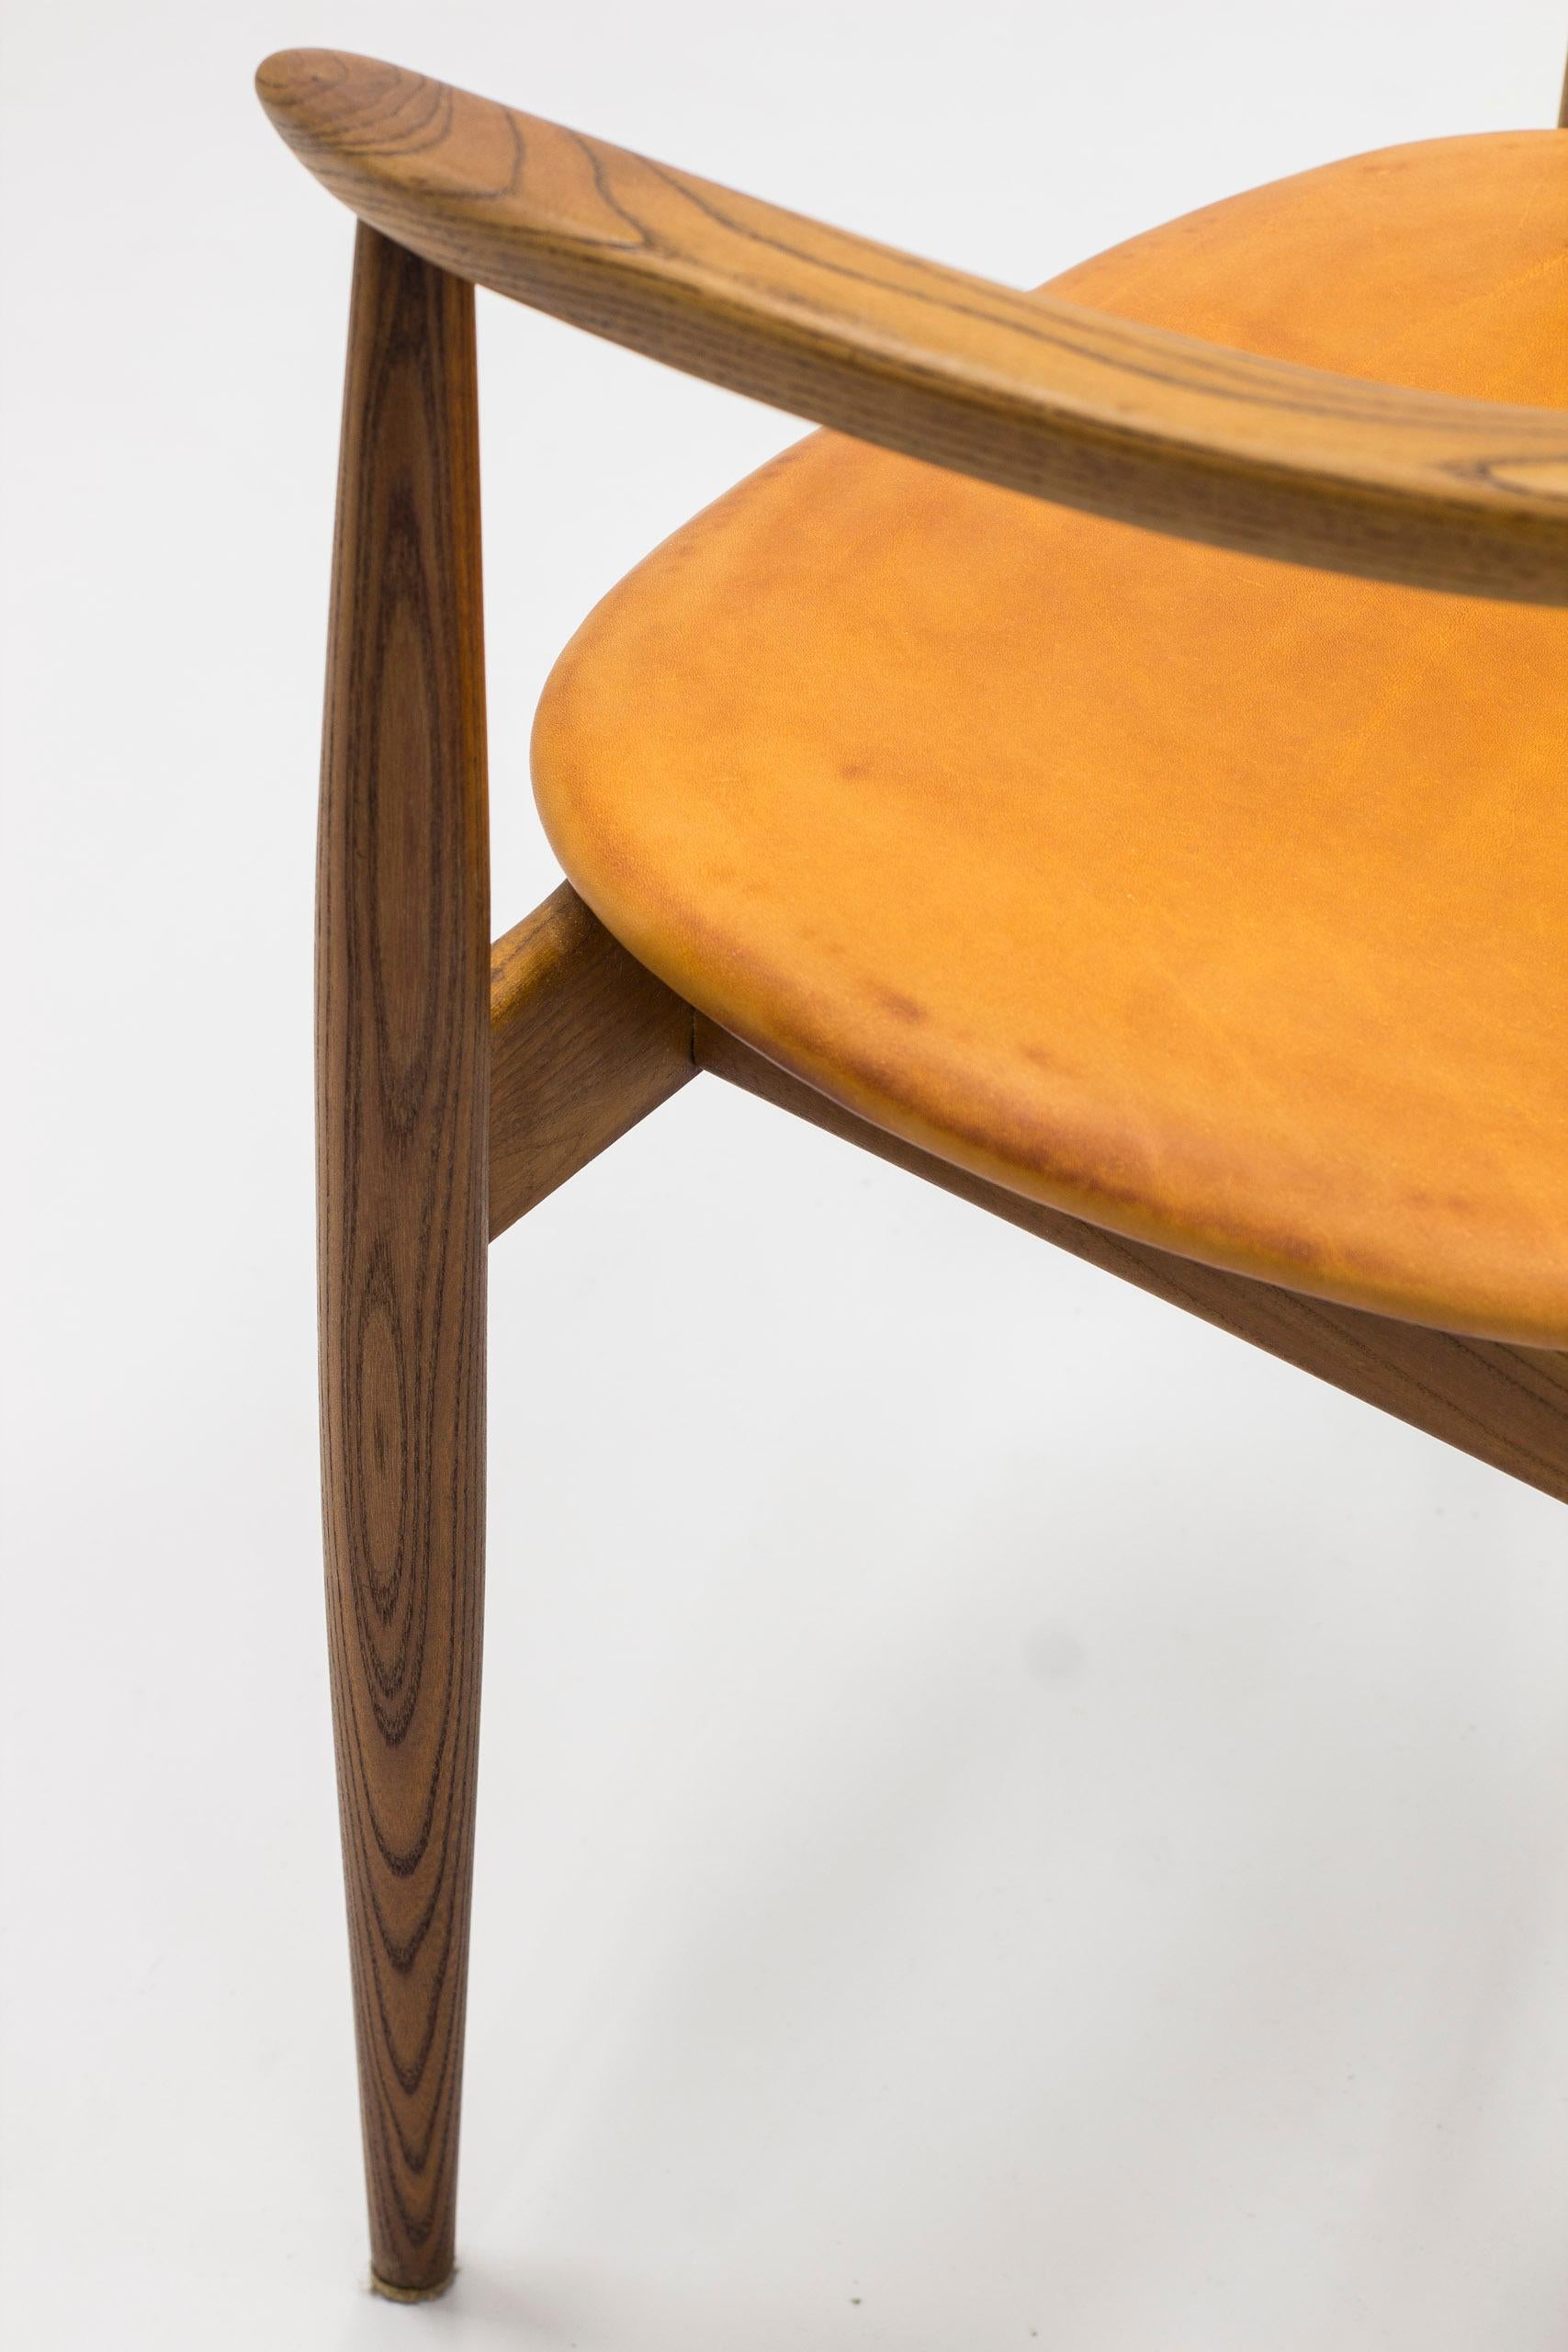 Arm chair in elm and leather with exquisite patina by Arne Wahl Iversen, 1960s For Sale 4